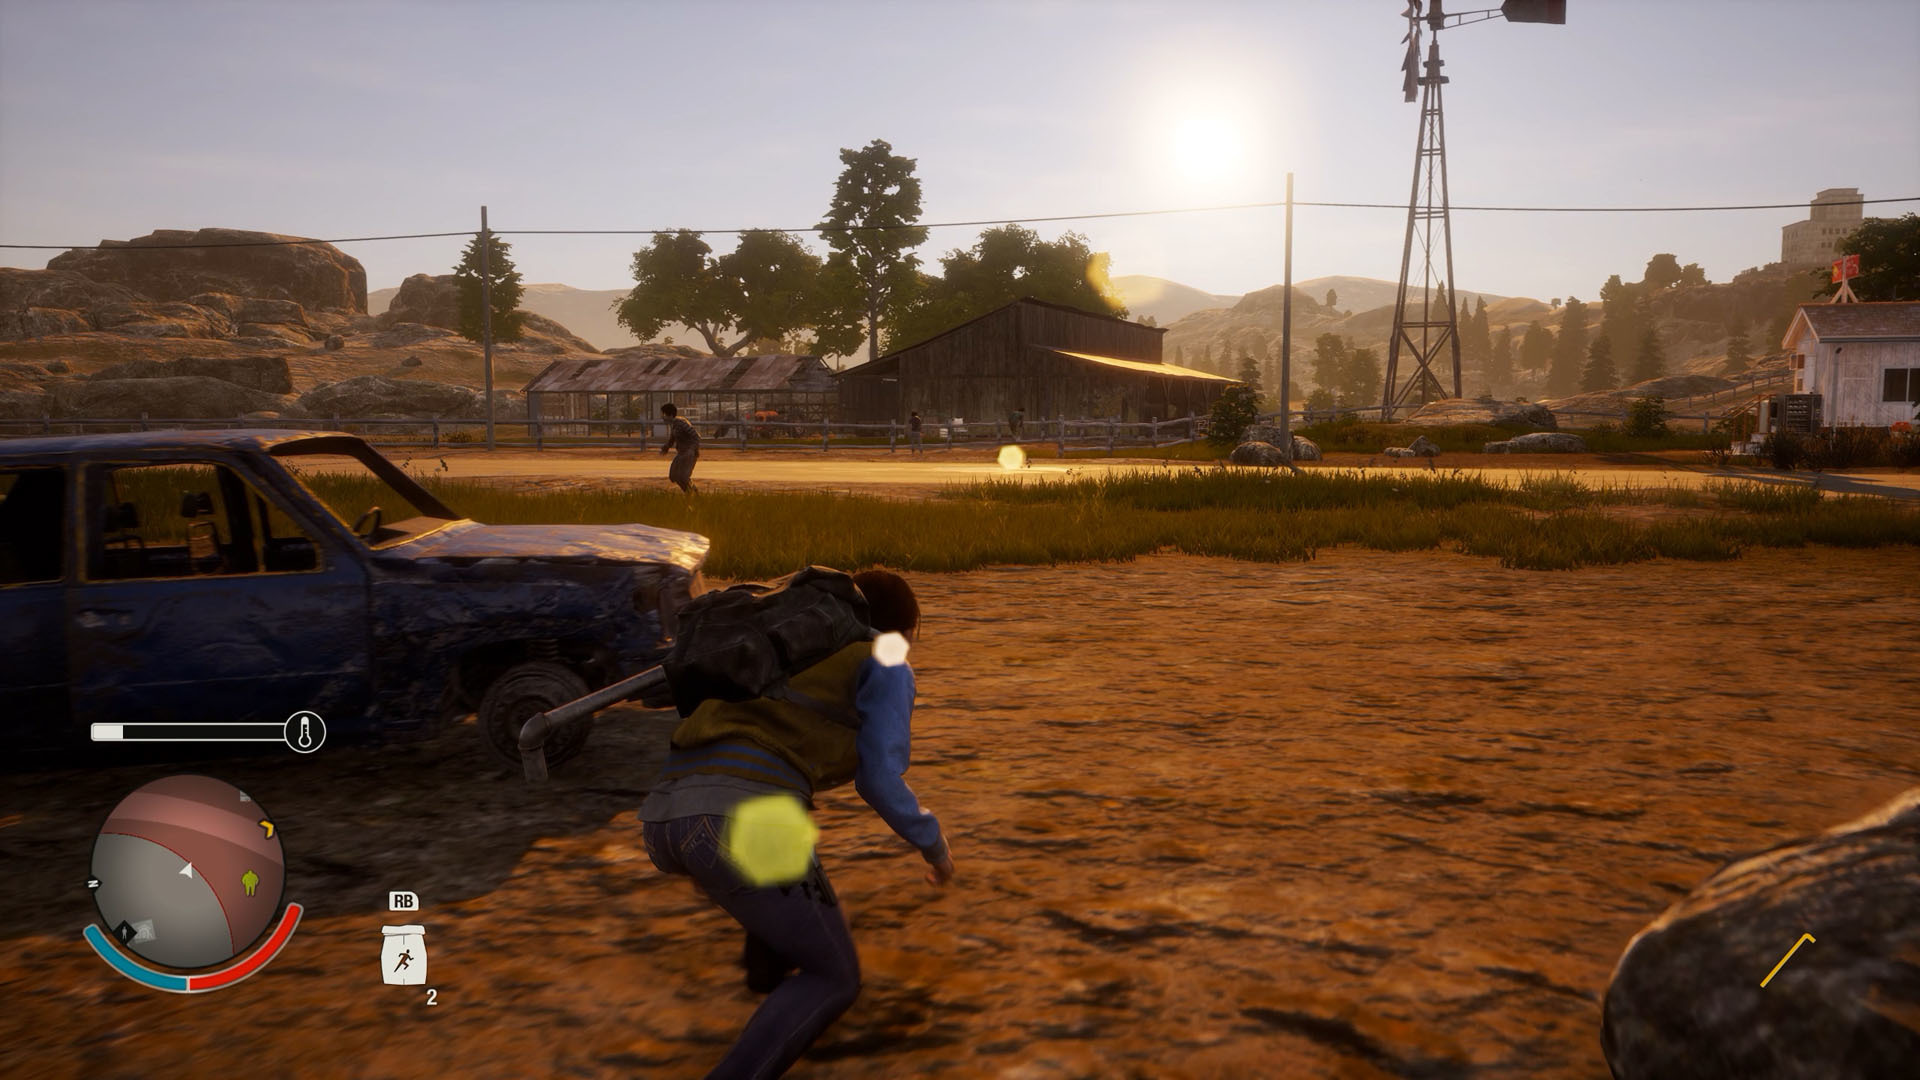 State of decay требования. State of Decay 2. Игра State of Decay 2. State of Decay 2 системные требования. State of Decay 2 требования.